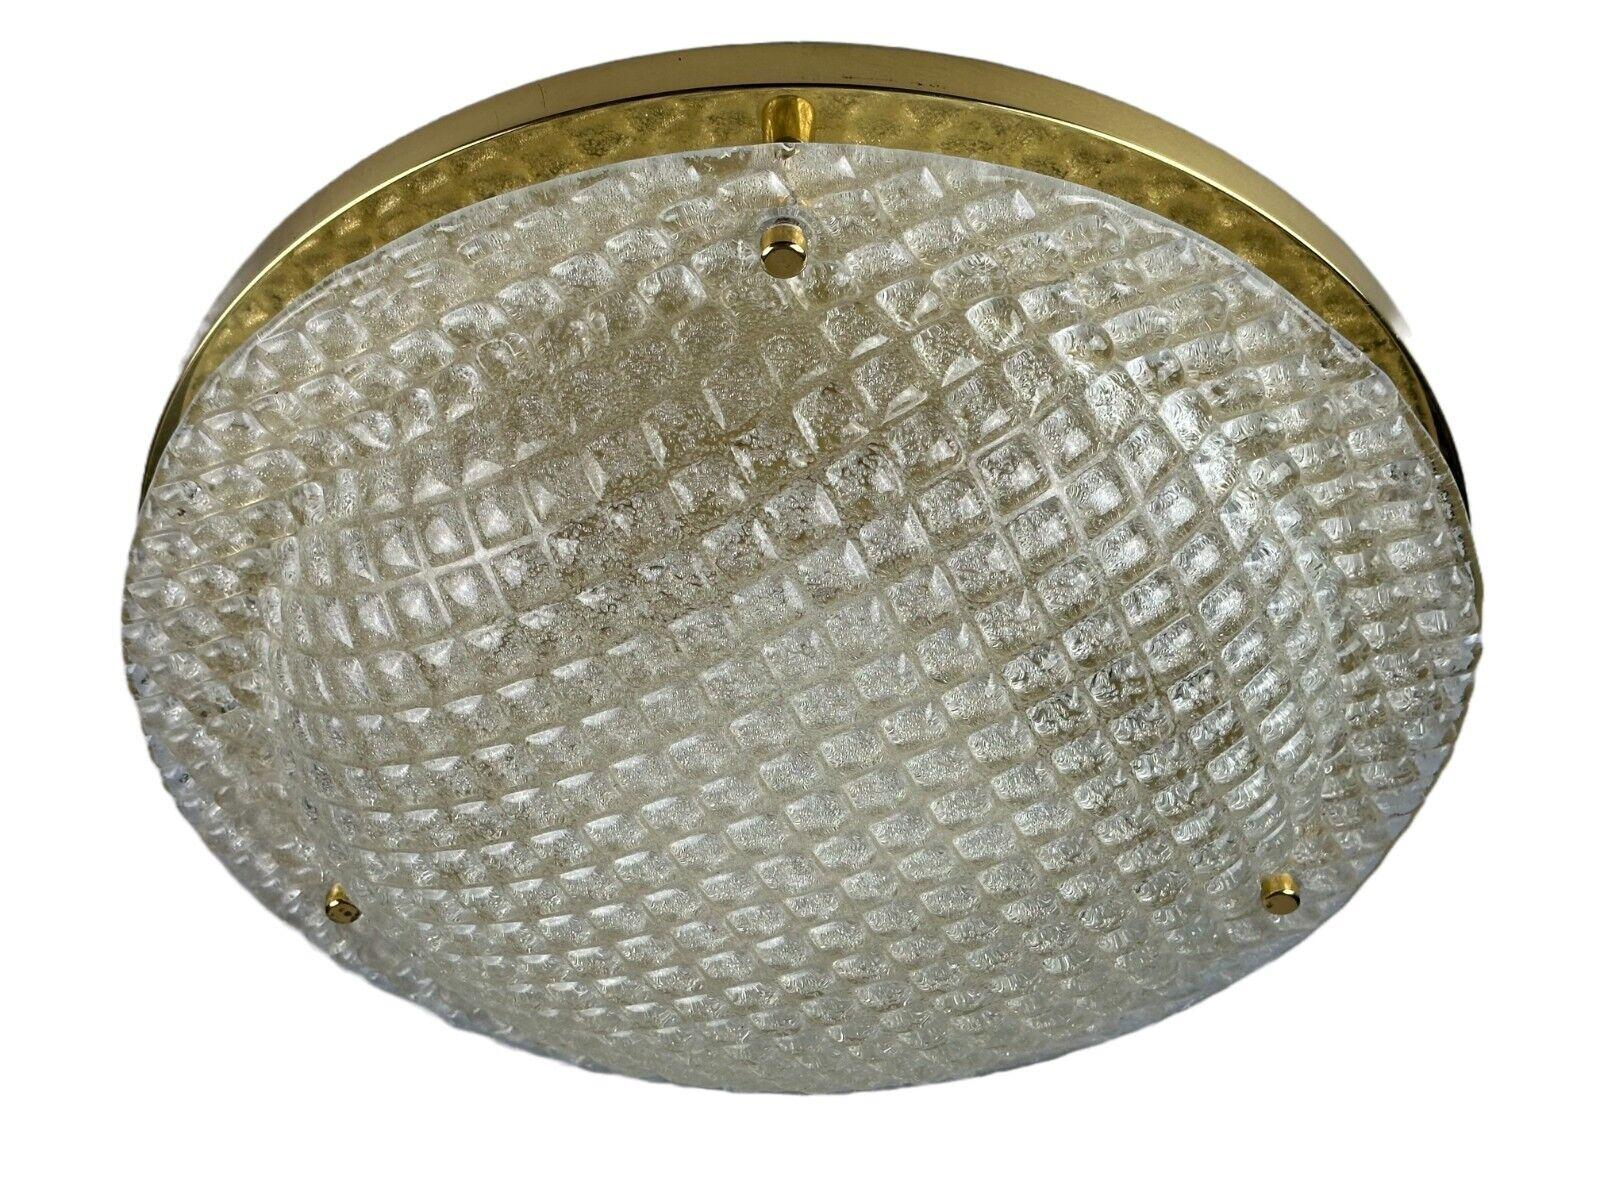 60s 70s Plafoniere ceiling lamp by Fischer Leuchten Germany Space Age

Object: Plafoniere

Manufacturer: Fischer Leuchten

Condition: good

Age: around 1960-1970

Dimensions:

Diameter = 50cm
Height = 14cm

Other notes:

3x E27 socket

The pictures